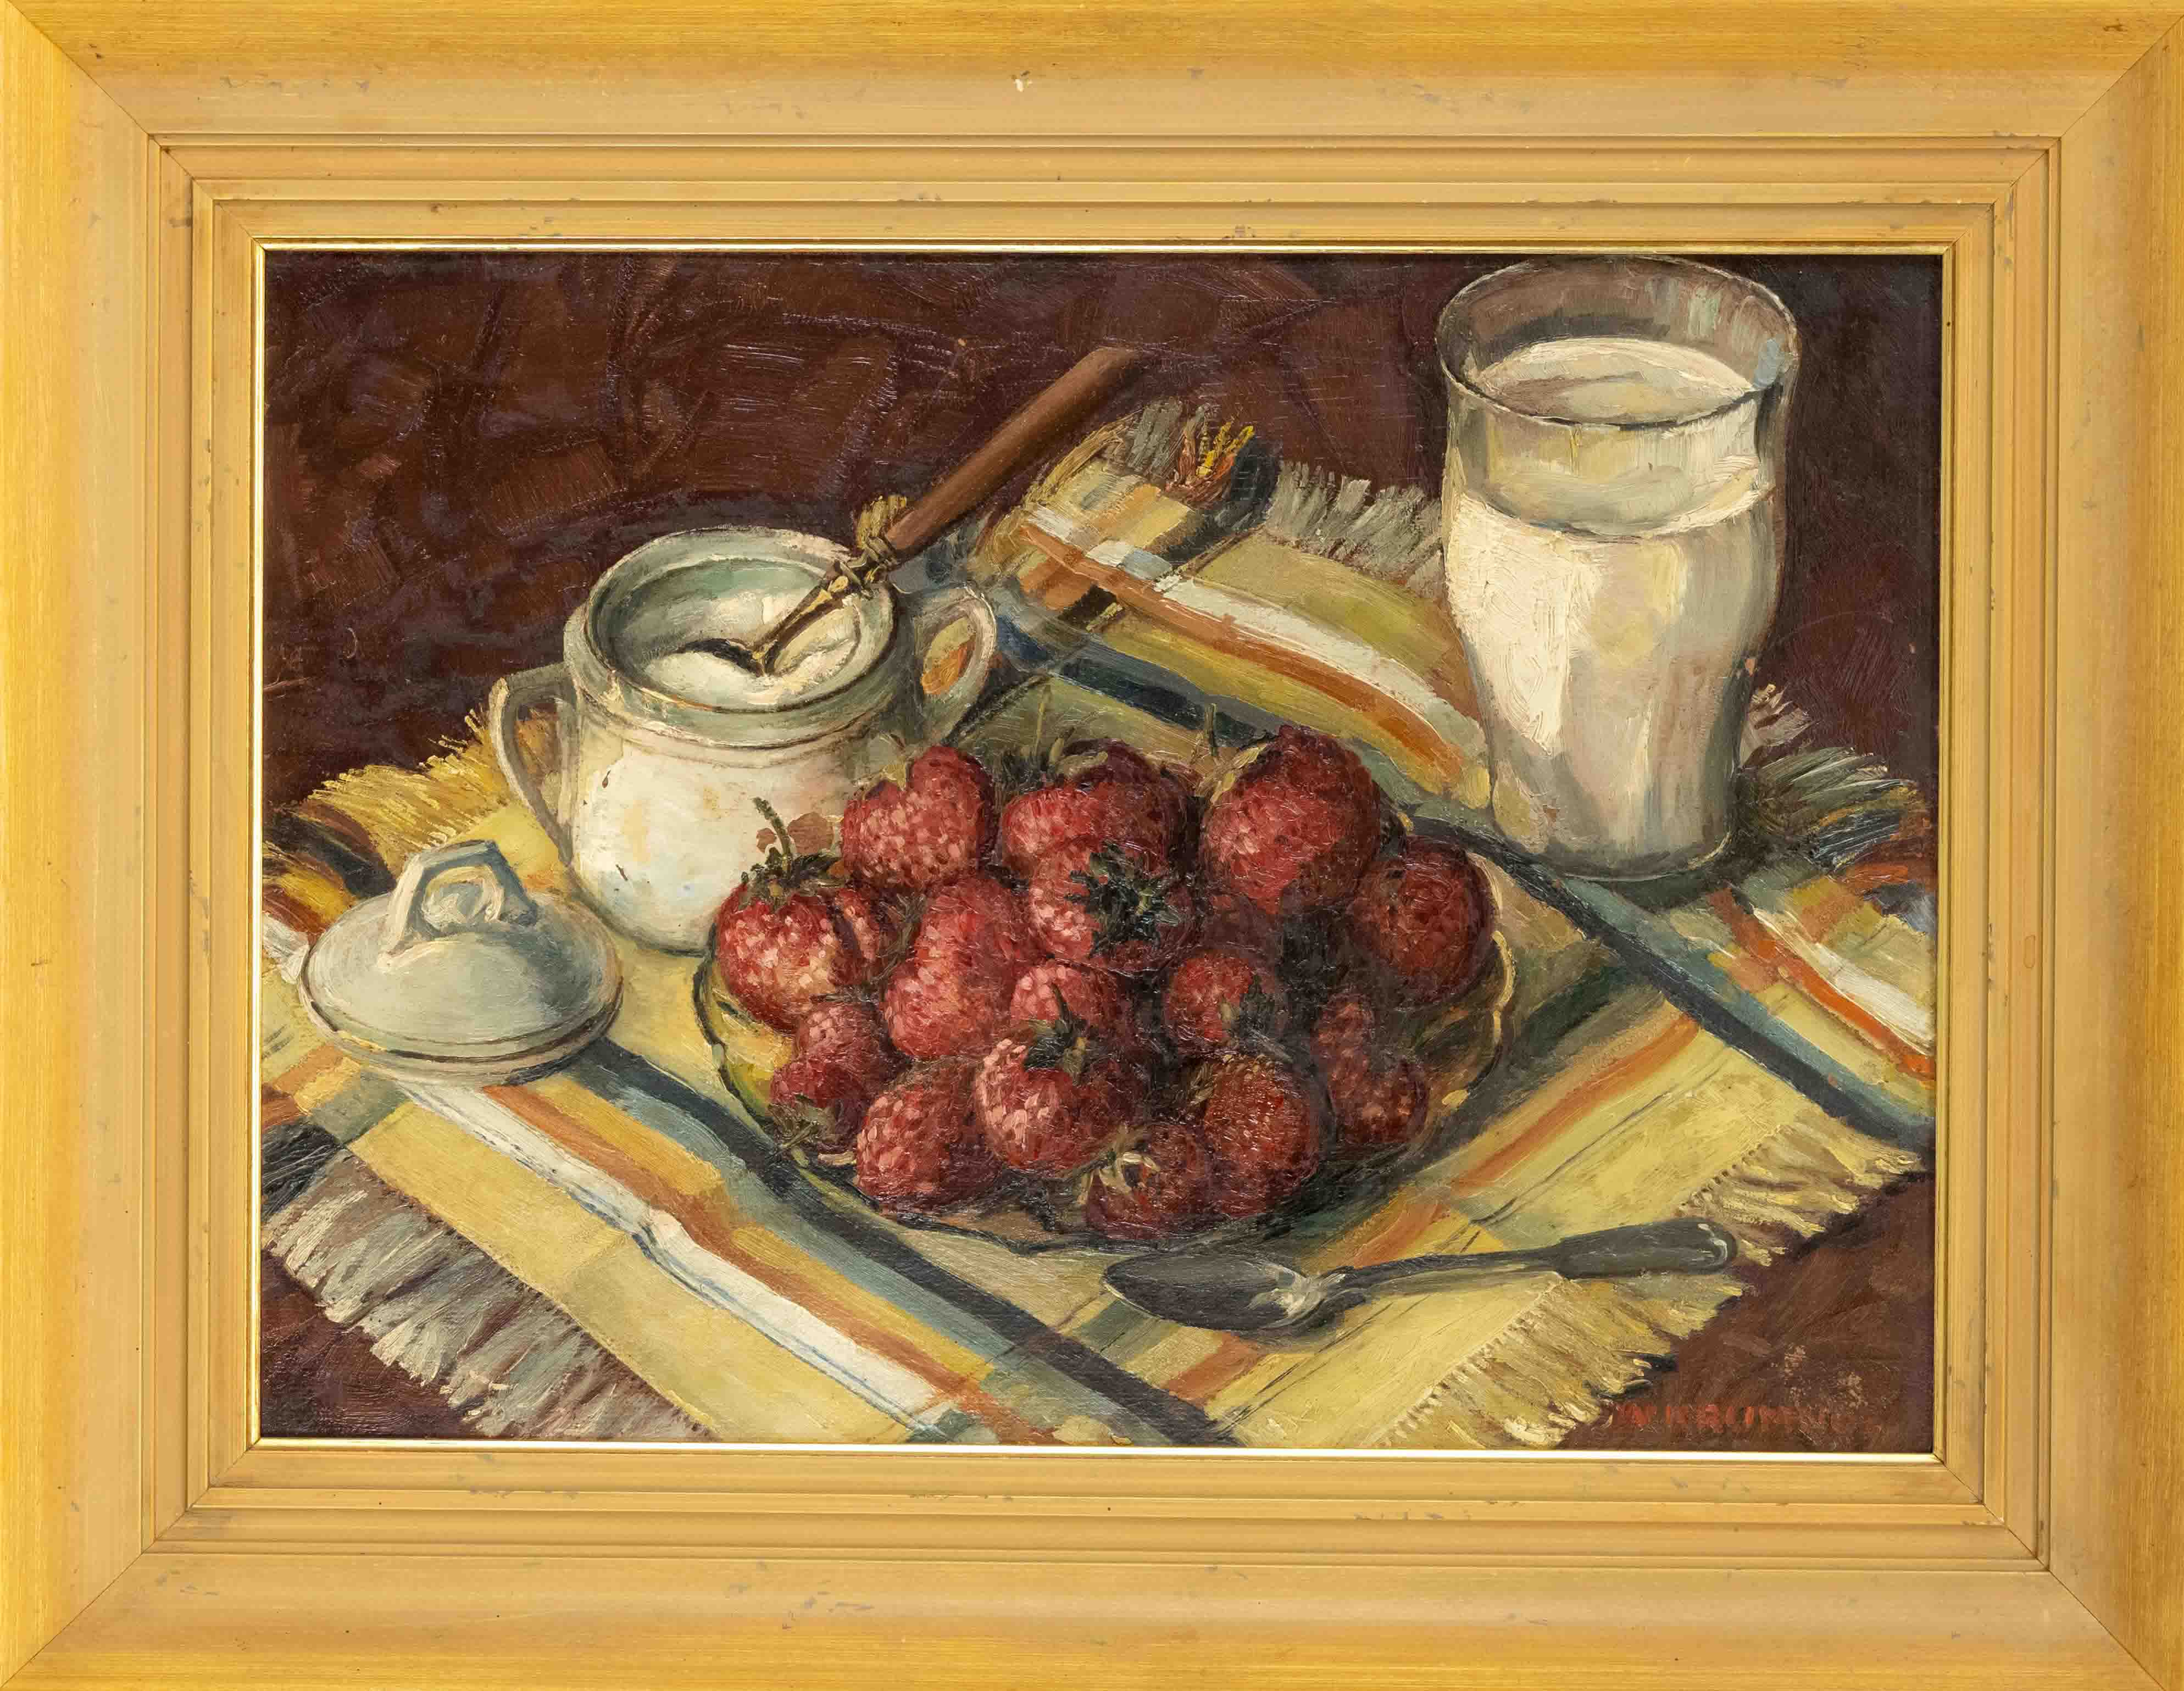 W. Krumnow, 1st half 20th c., Still life with milk glass and strawberry bowl, oil on wood, signed